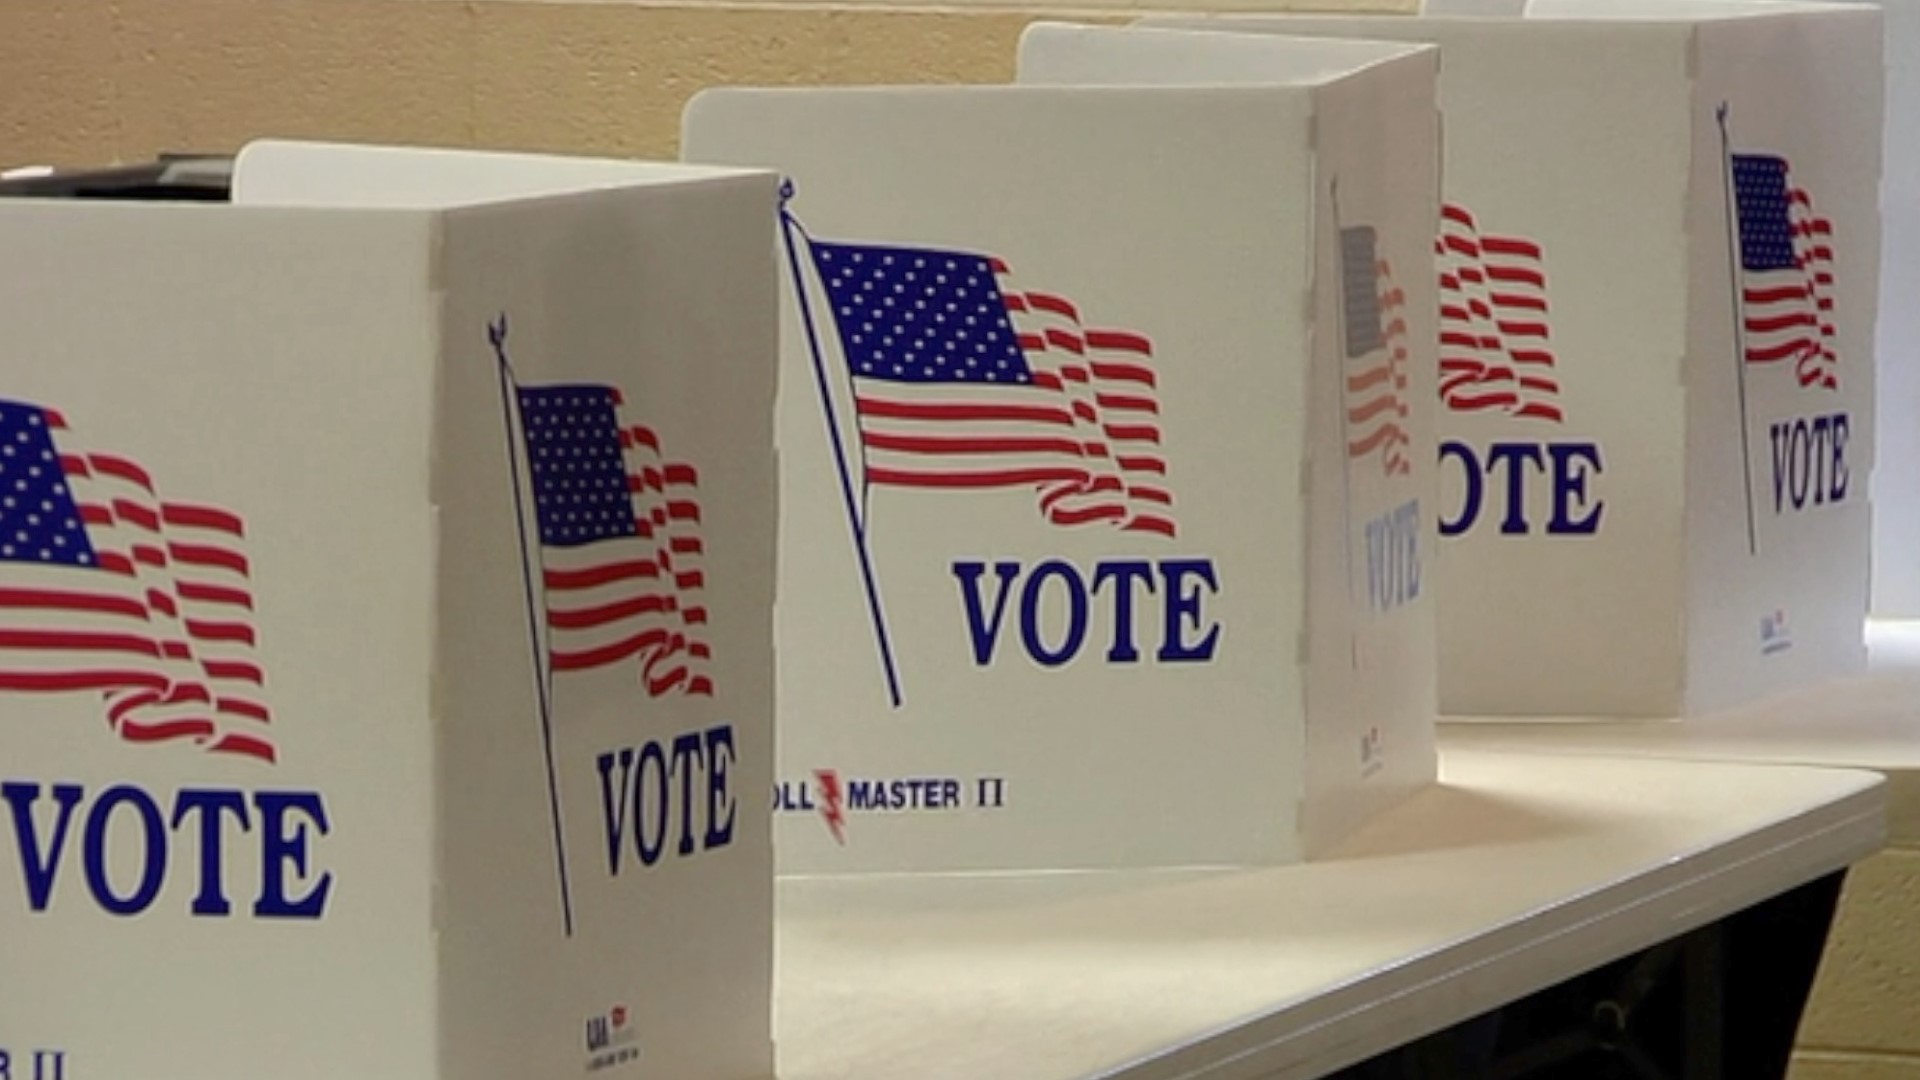 Adding momentum to voter registration efforts, several major U.S. companies are making Election Day a paid vacation day for their employees. Veuer's Chandra Lanier has the story.